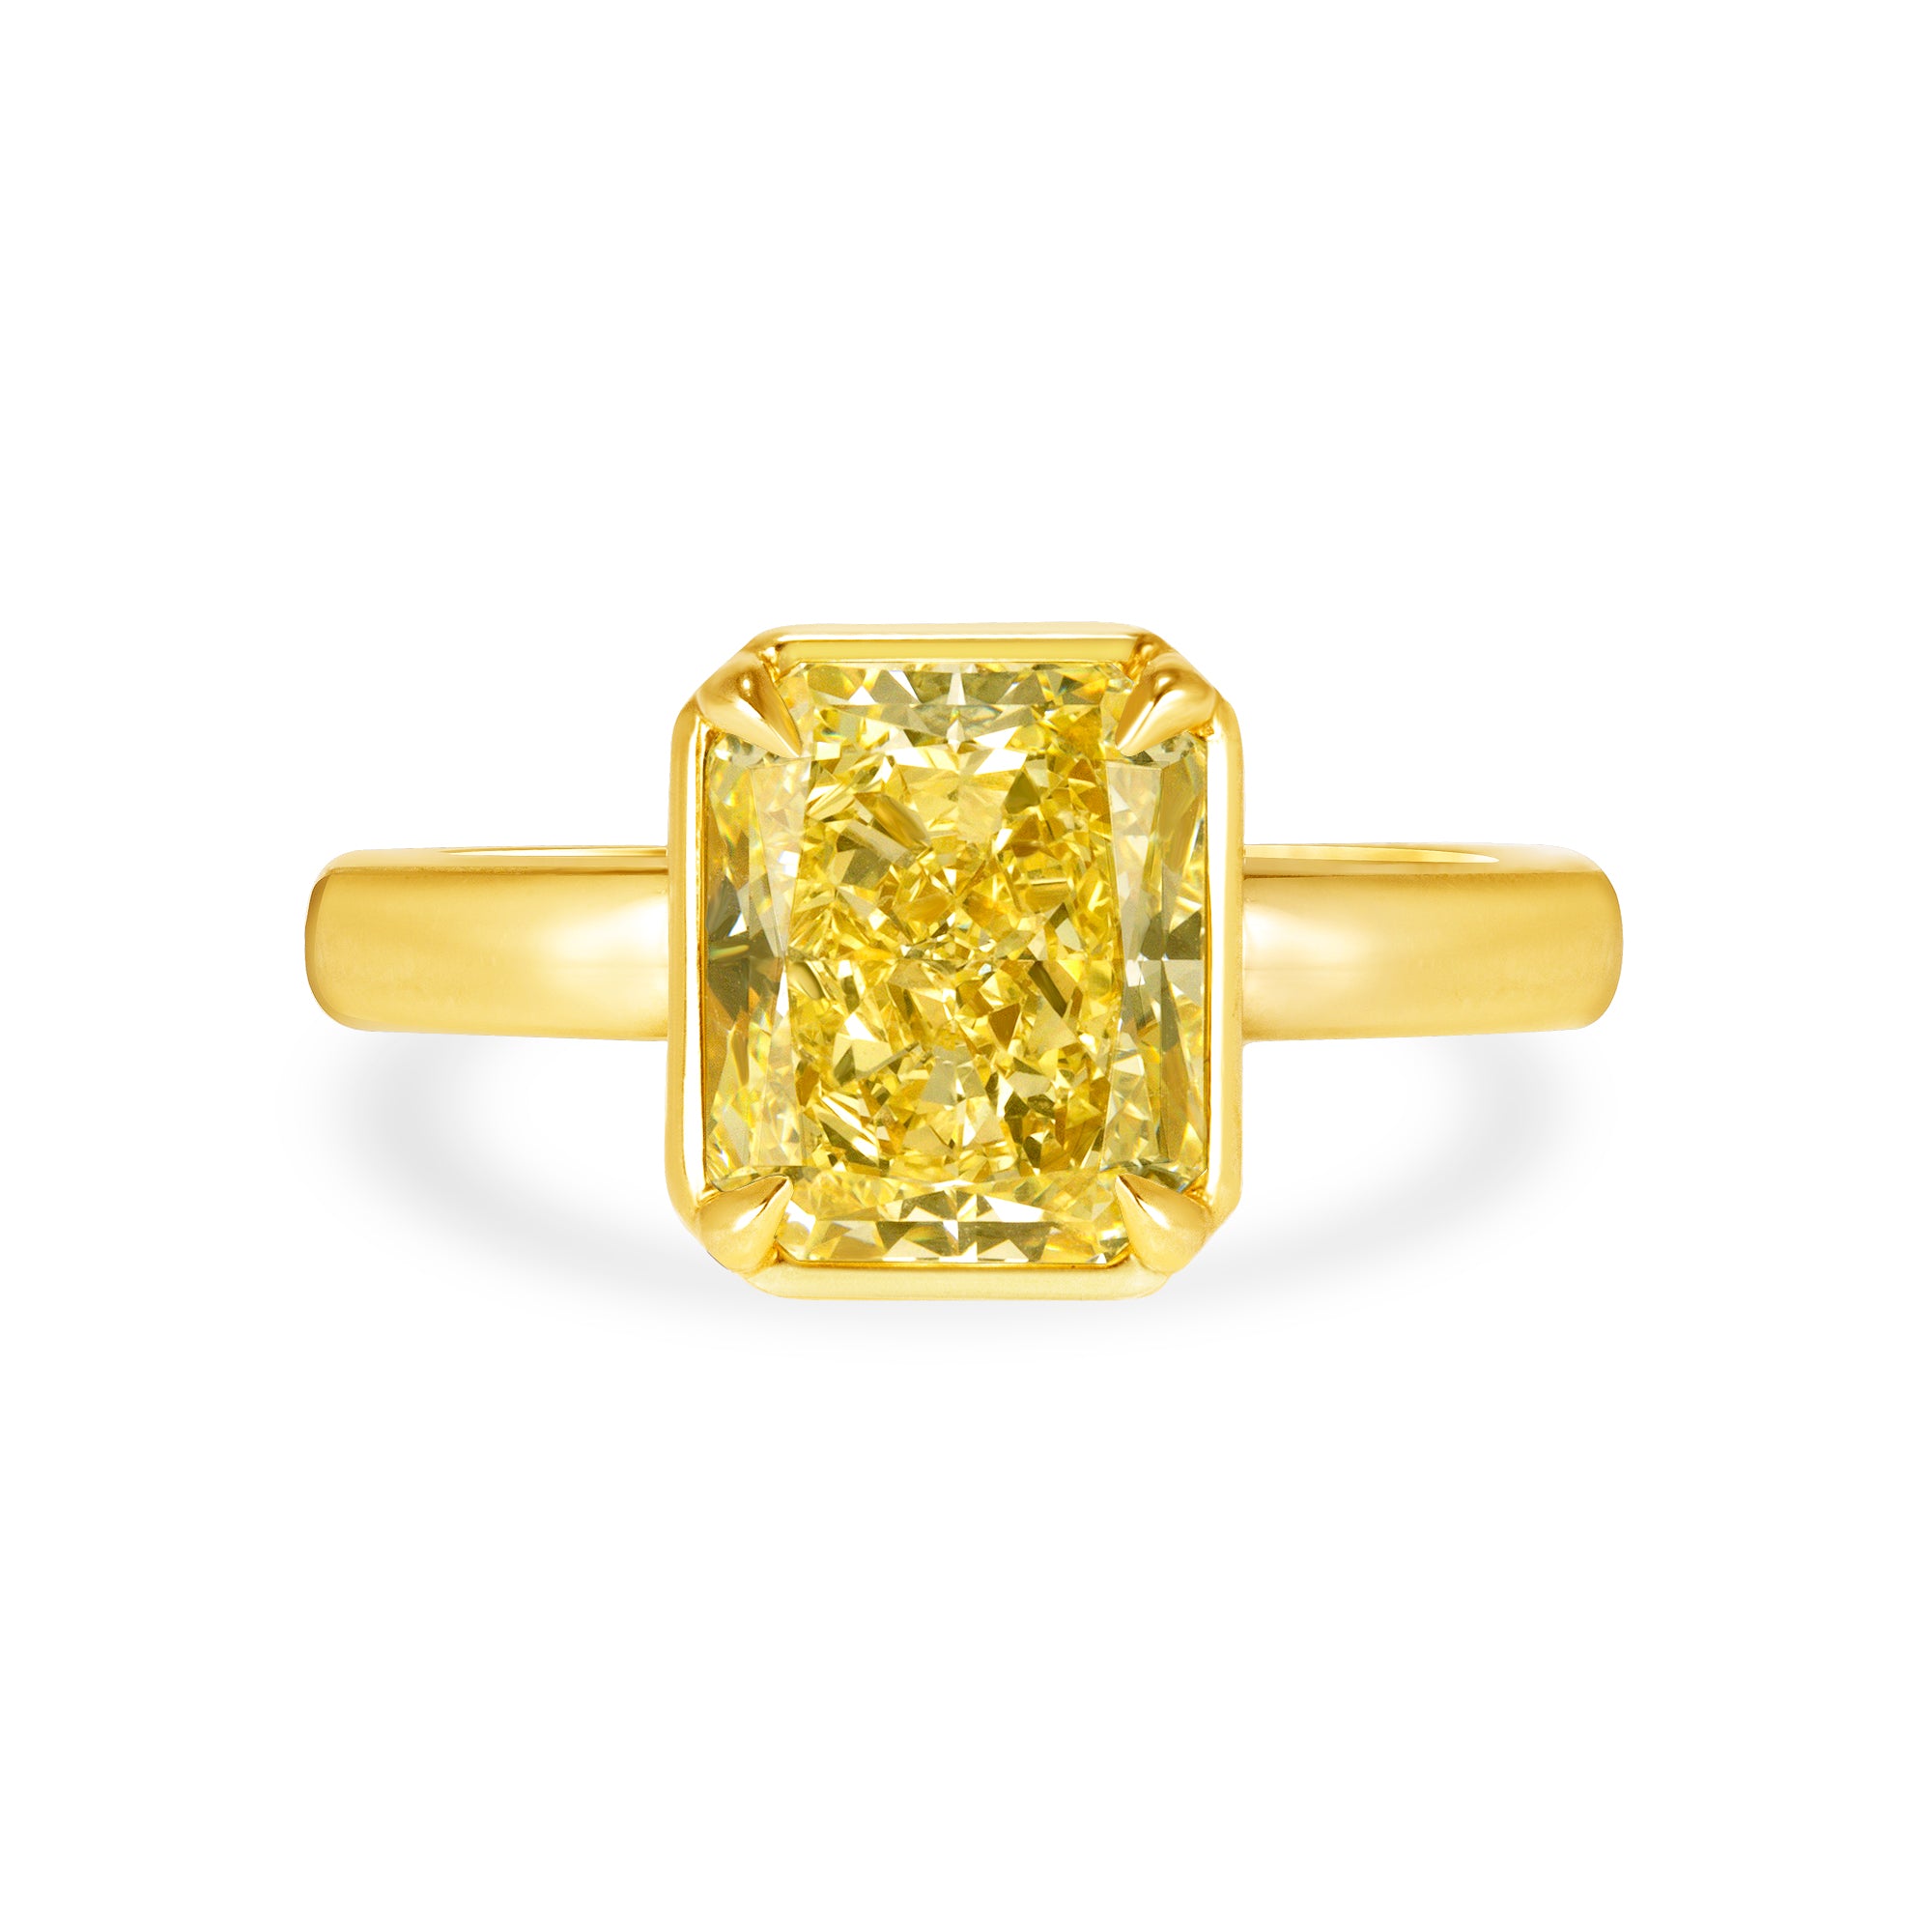 Radiant Cut Fancy Yellow Diamond Solitaire Ring in 18 Karat Yellow Gold